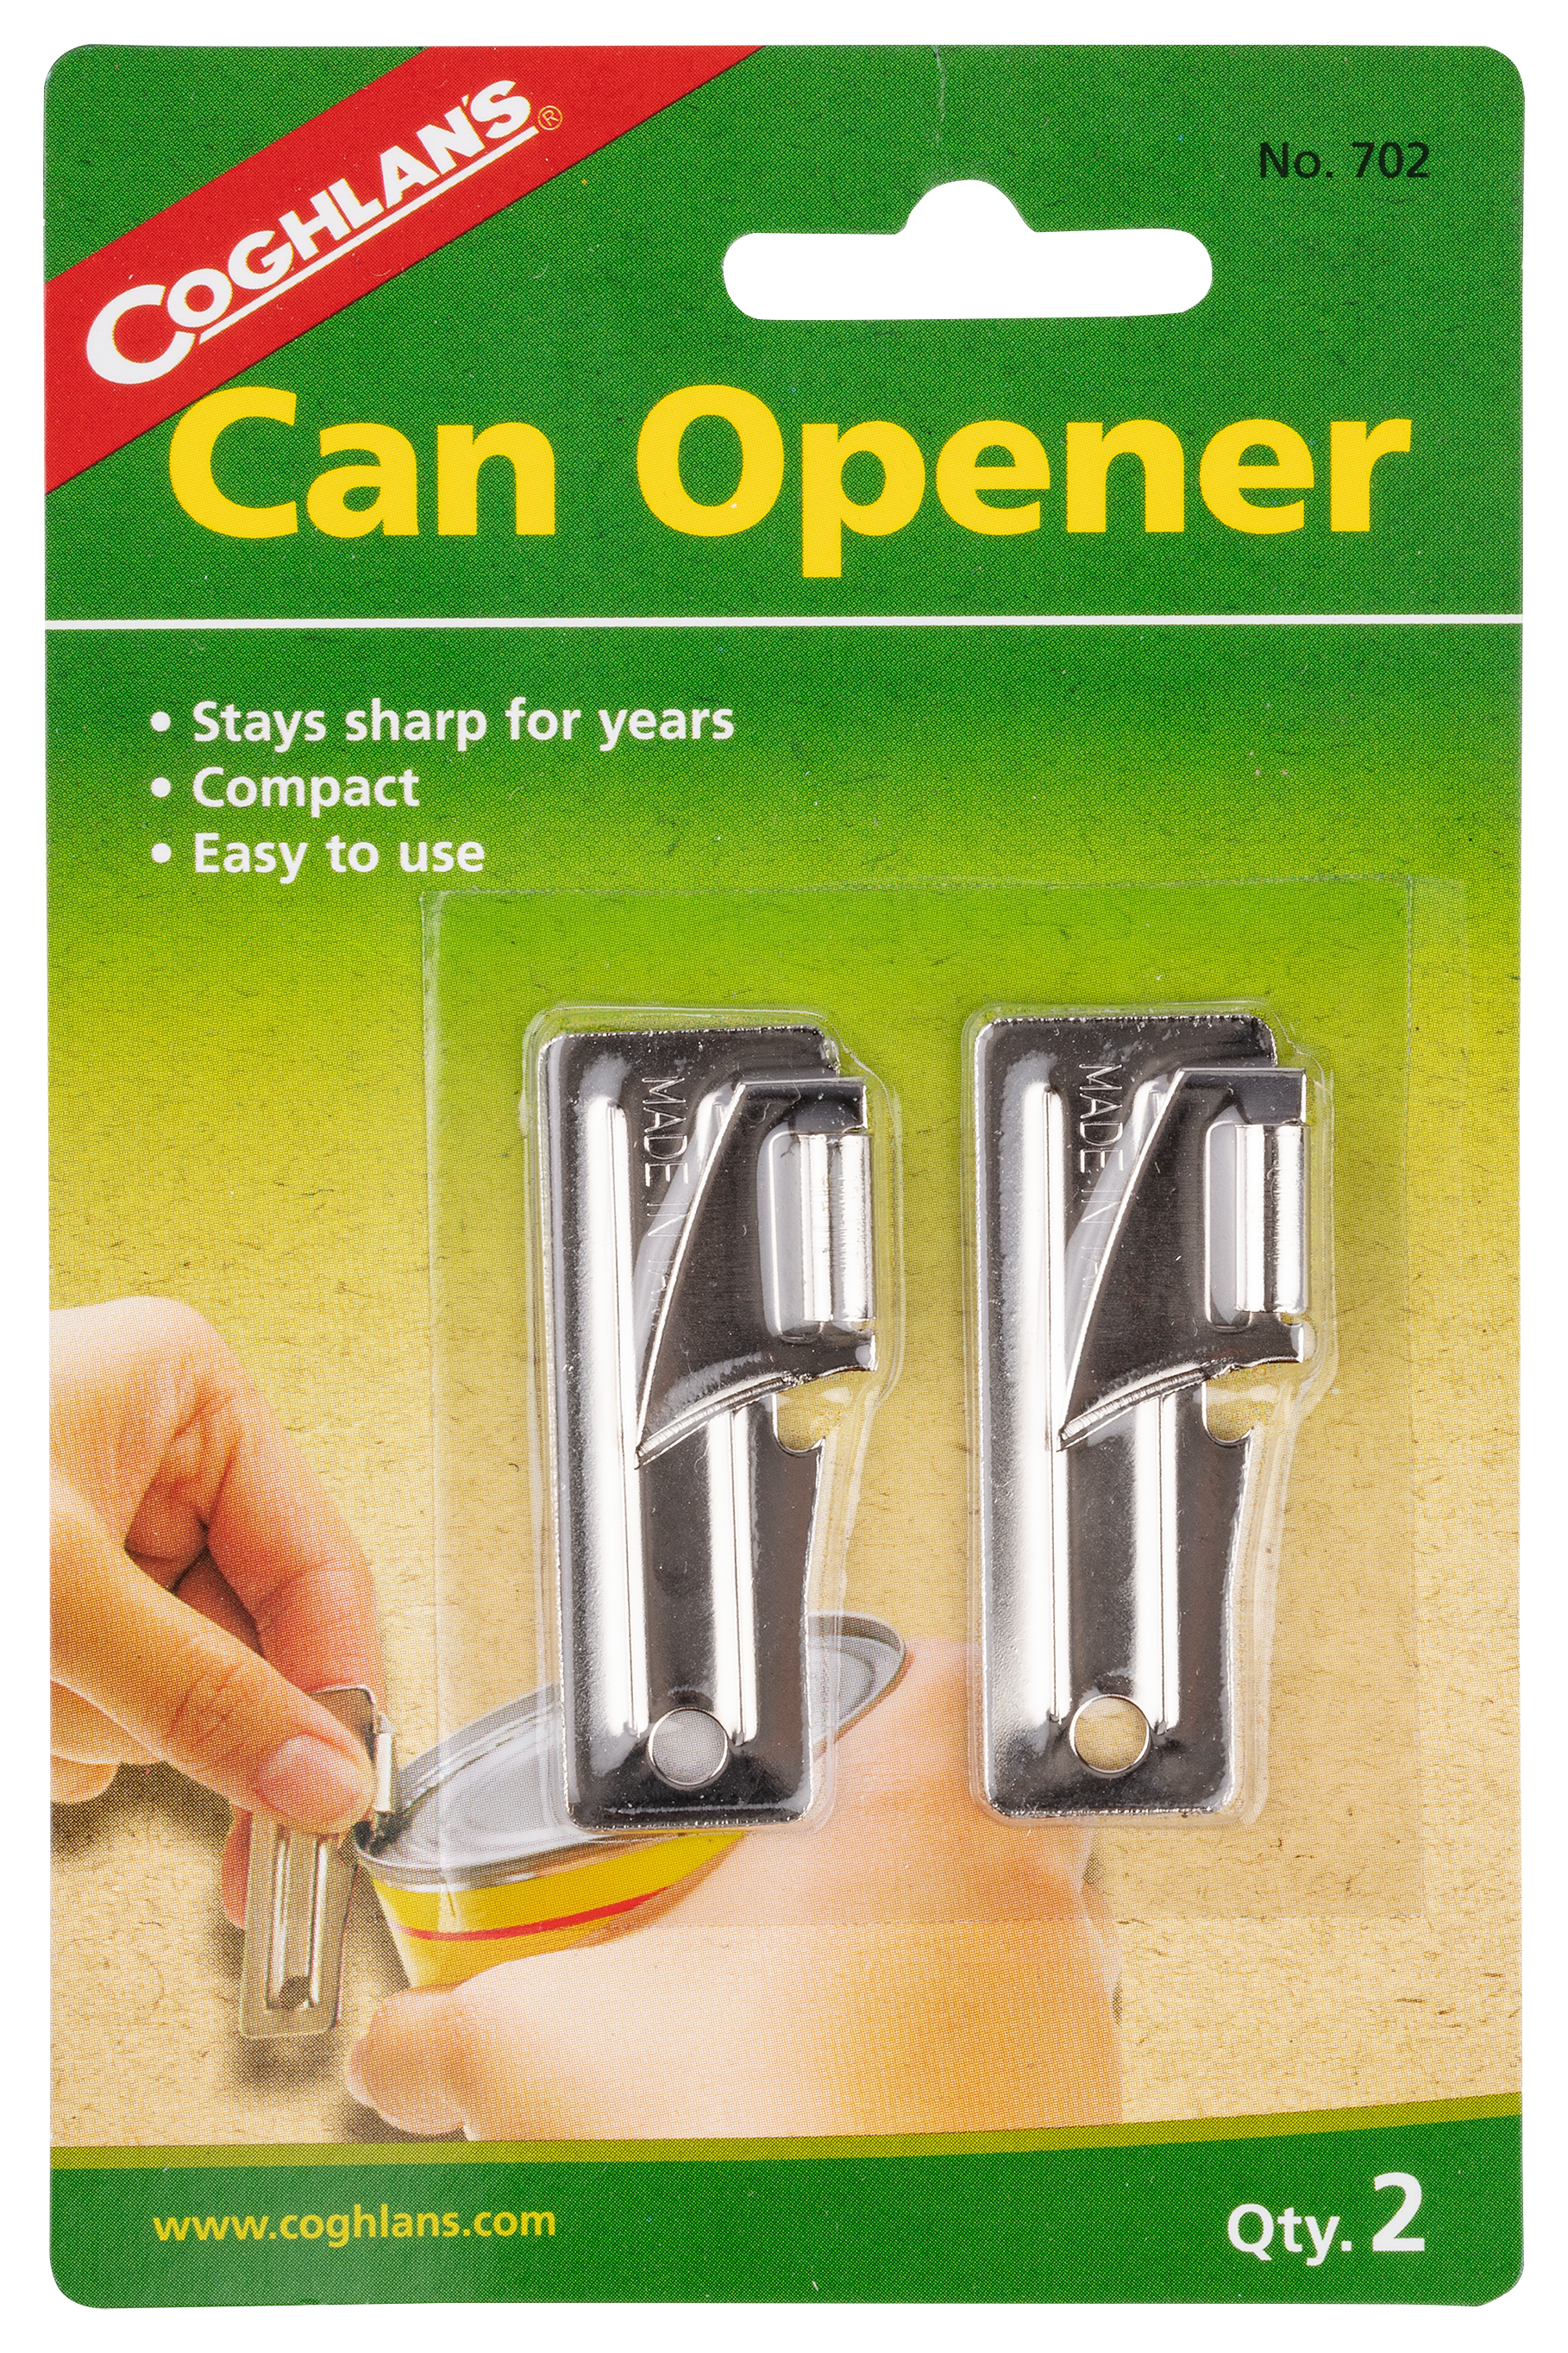 P-38 Can Opener PAIR - Two Black Steel P38 GI-Style Can Openers